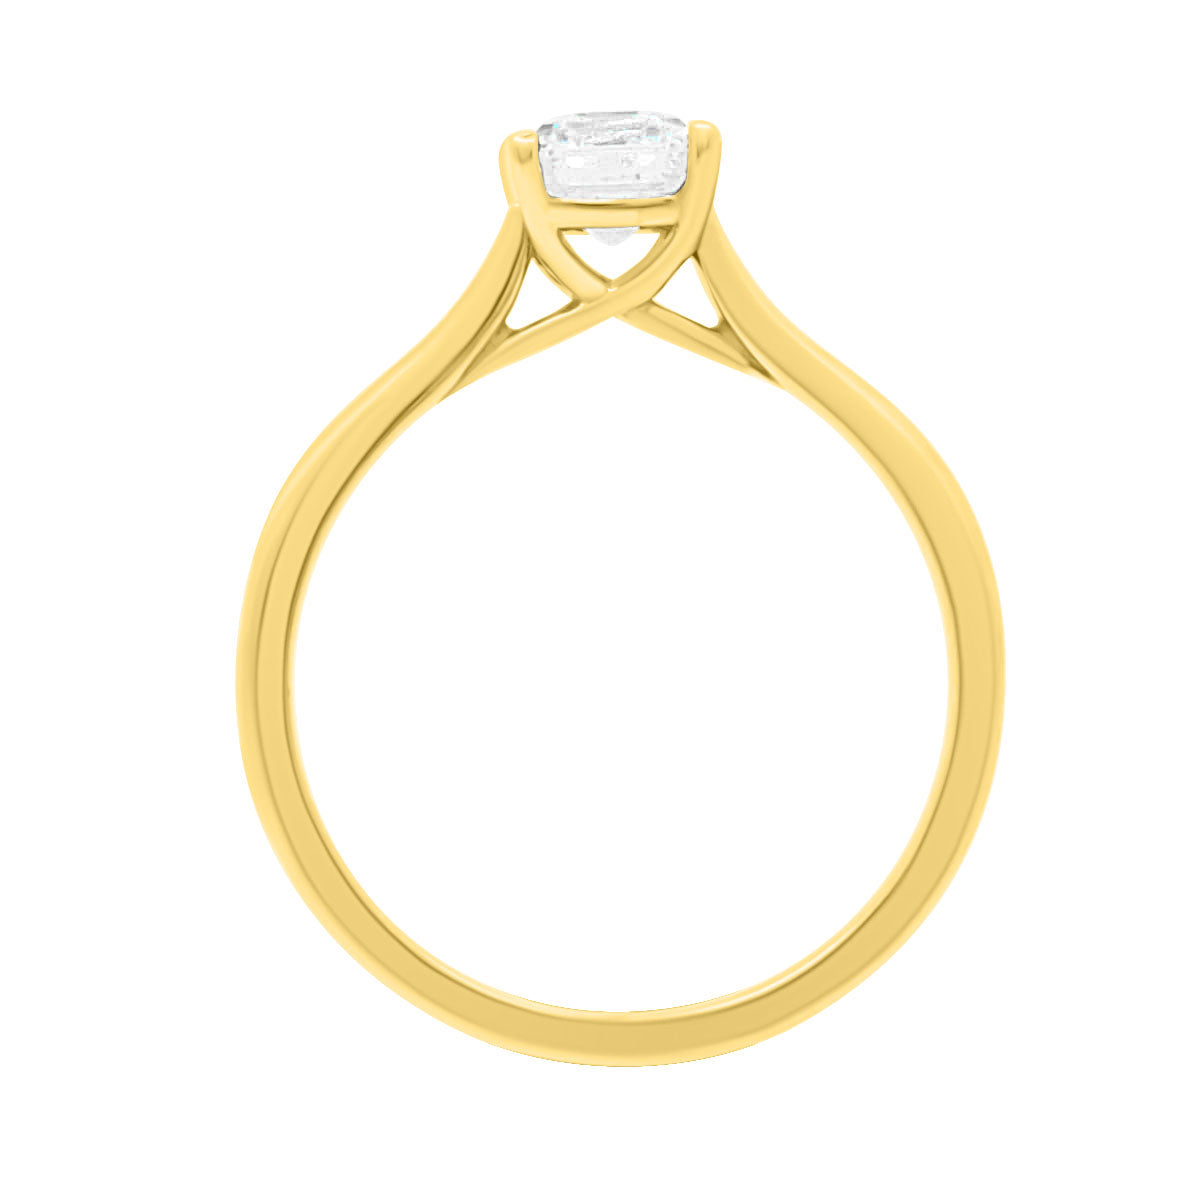 Emerald cut solitaire engagement ring IN Yellow Gold in an upright position